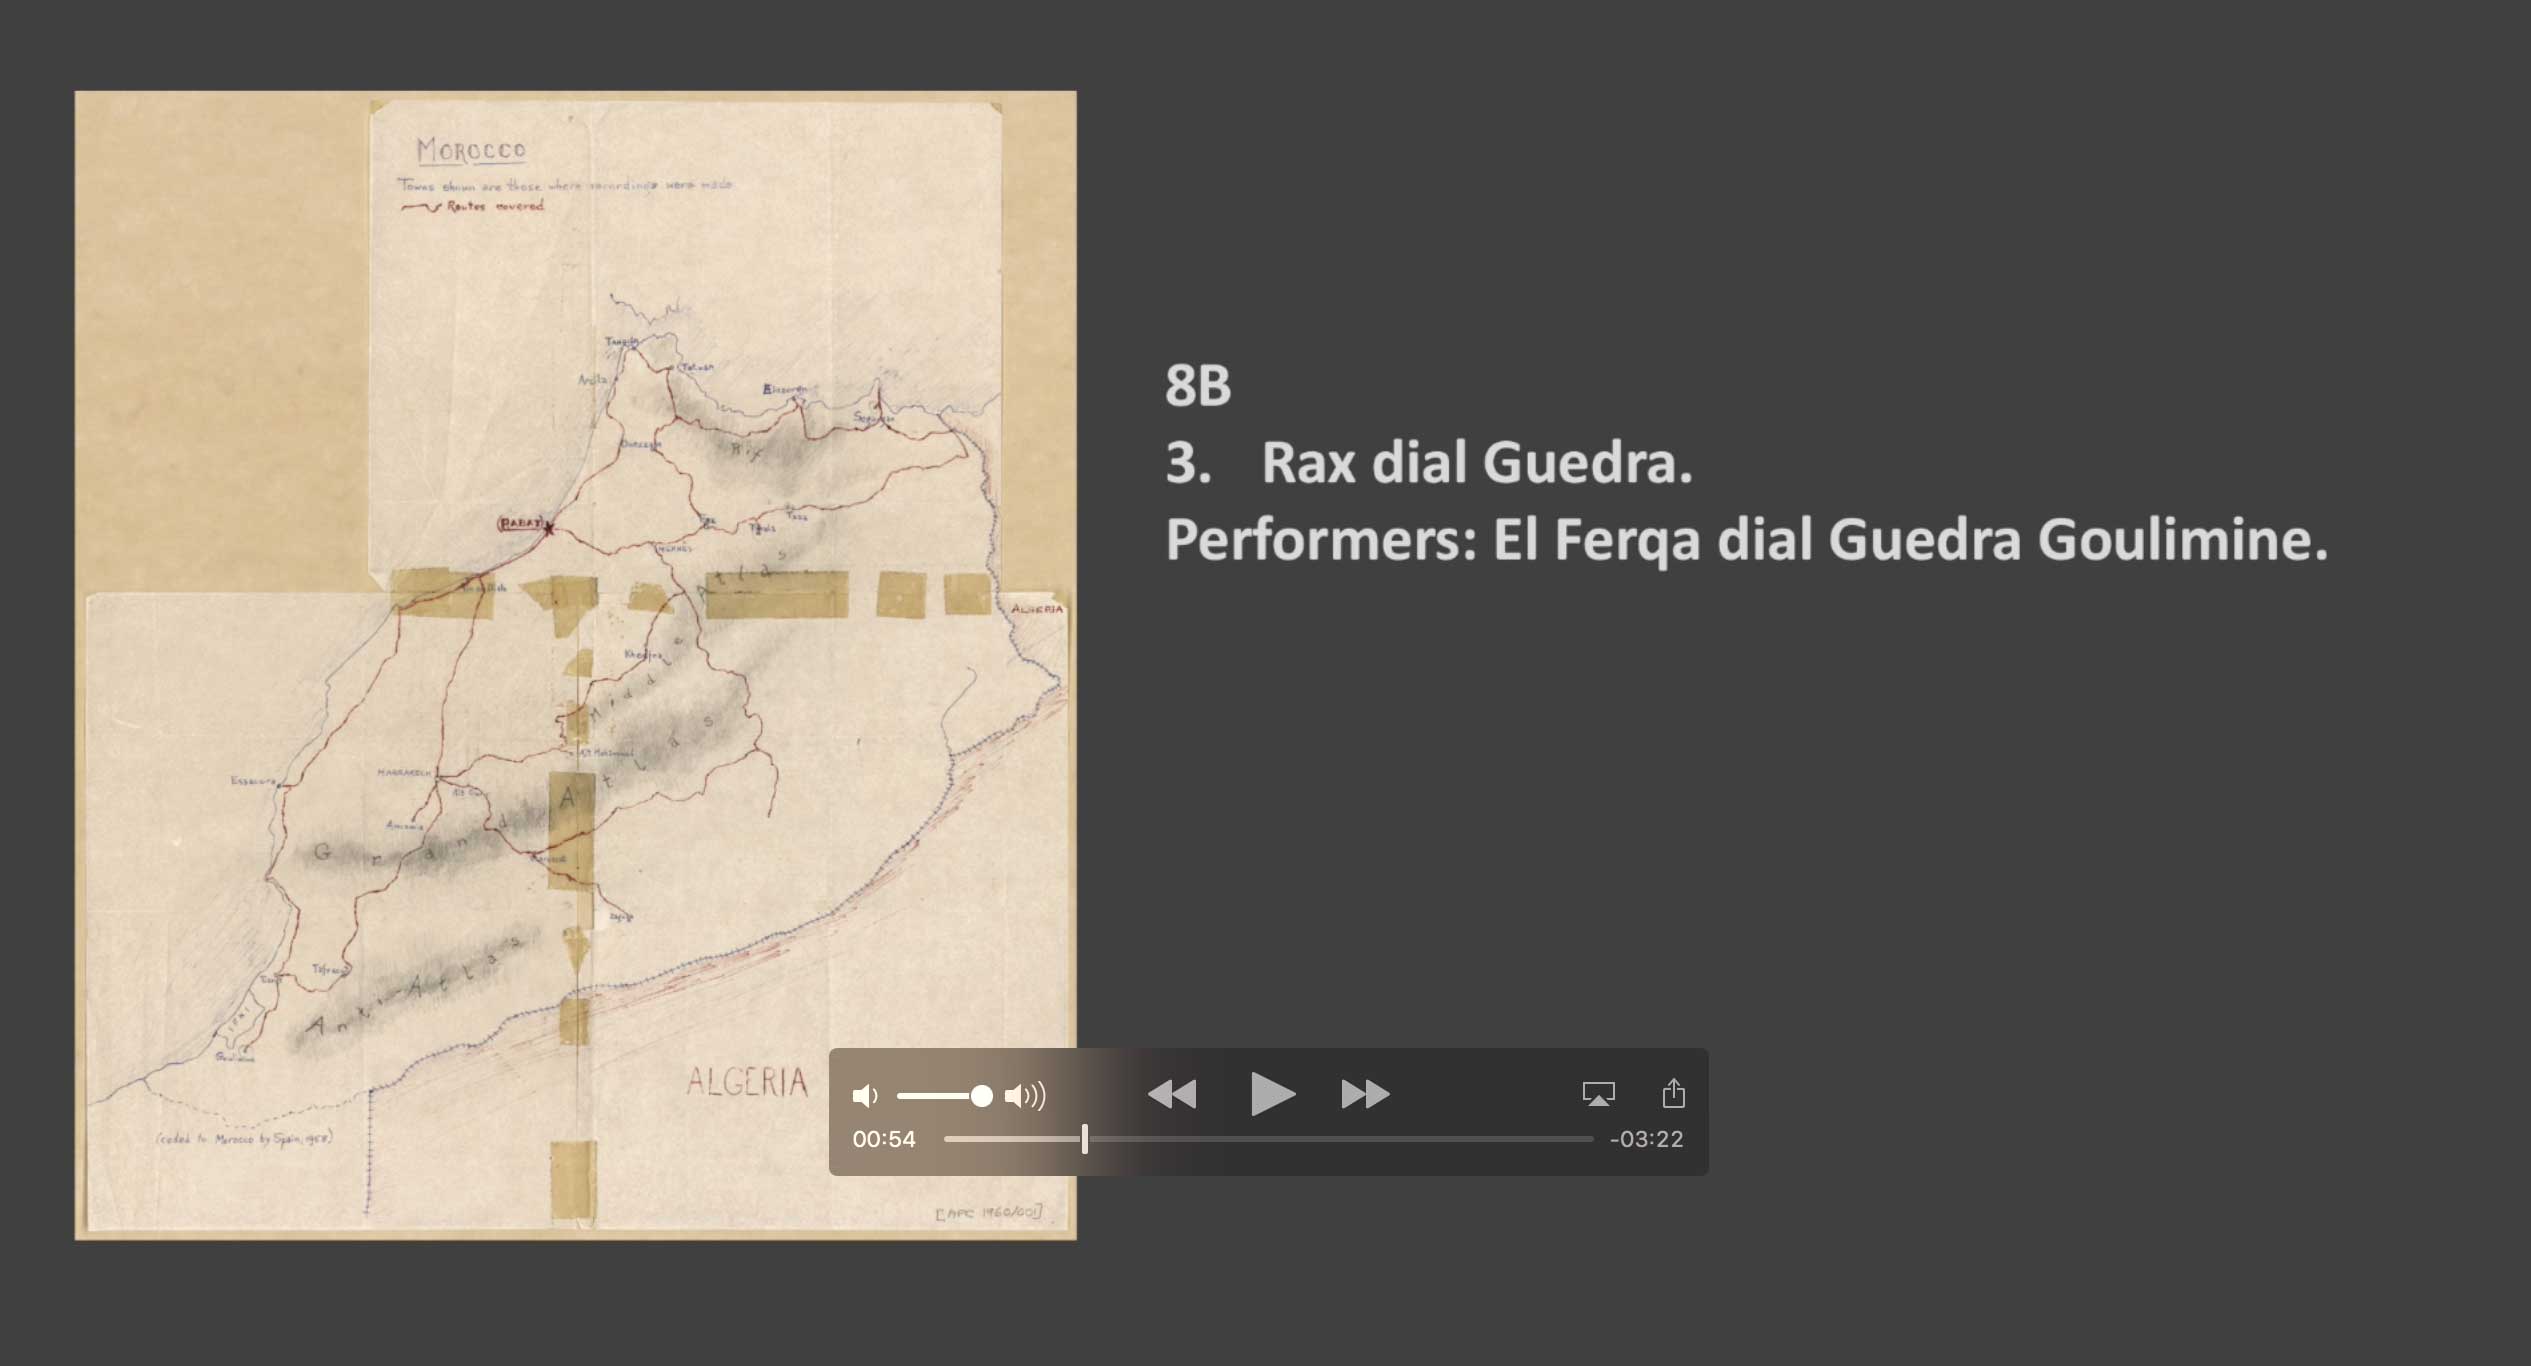 El Ferqa dial Guedra  - 8B Track 3 Rax dial Guedra
Performers: El Ferqa dial Guedra Goulimine 

Recorded by Paul Bowles at Goulimine, Moroccan Sahara.
August 12, 1959
